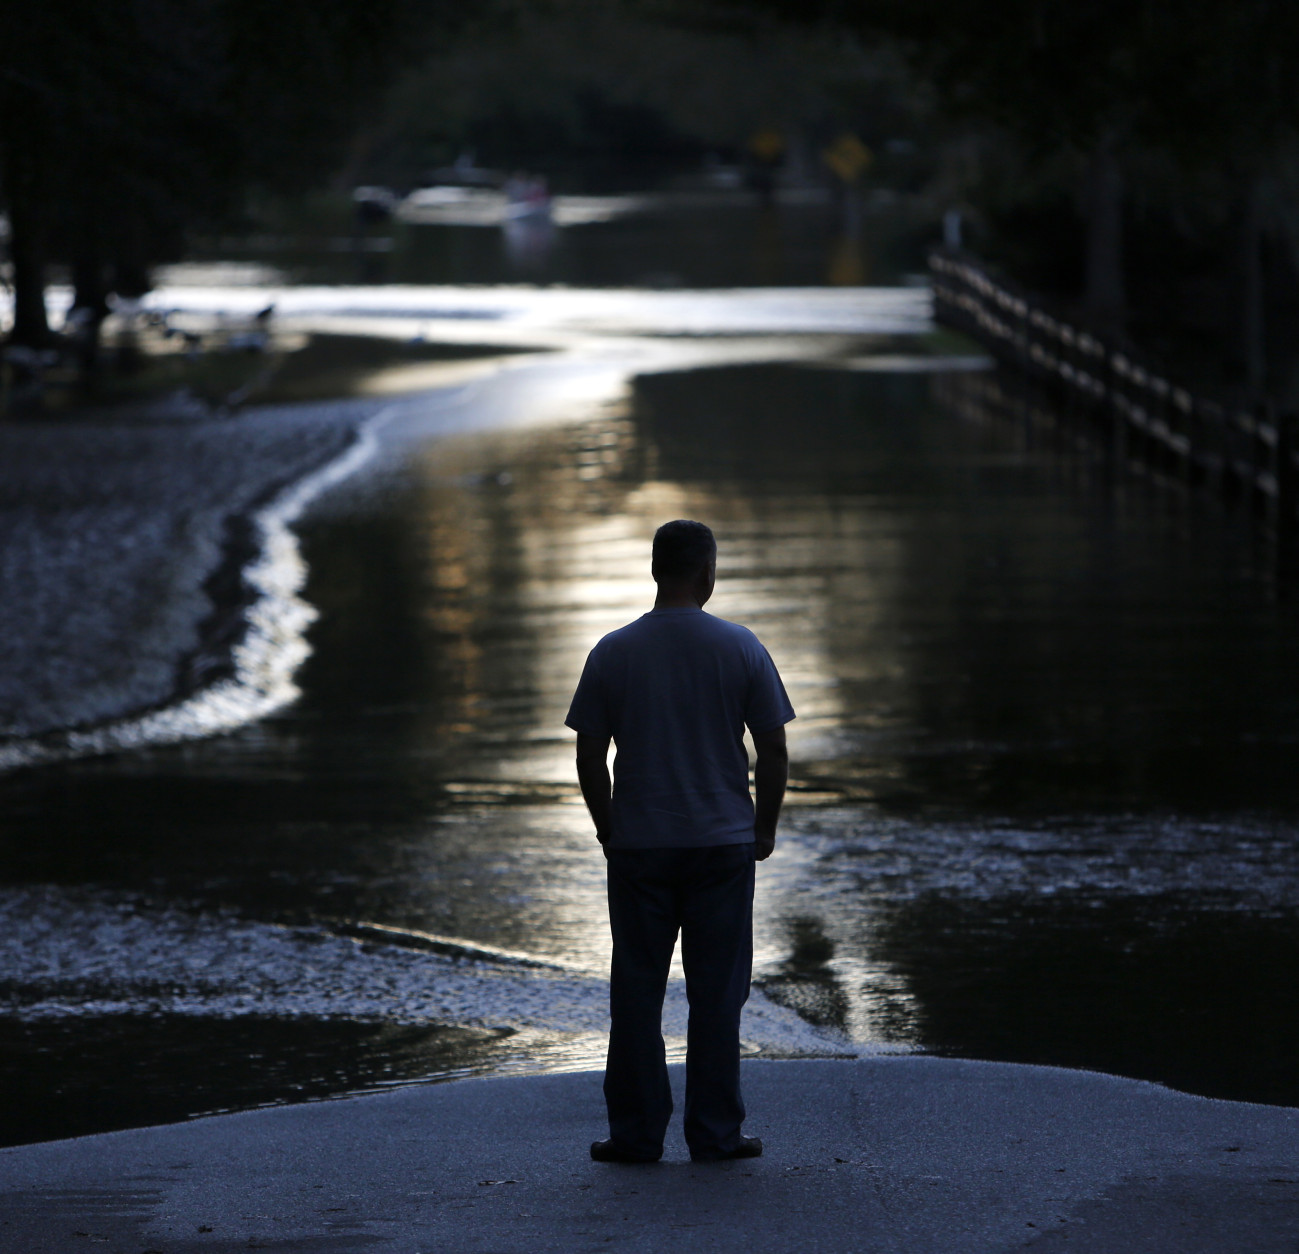 A resident looks down Mayfield St. as the Ashley river floodwaters rise in the Ashborough subdivision near Summerville, S.C., Tuesday, Oct. 6, 2015. Residents are concerned that the Ashley river will continue to rise as floodwaters come down from Columbia. (AP Photo/Mic Smith)